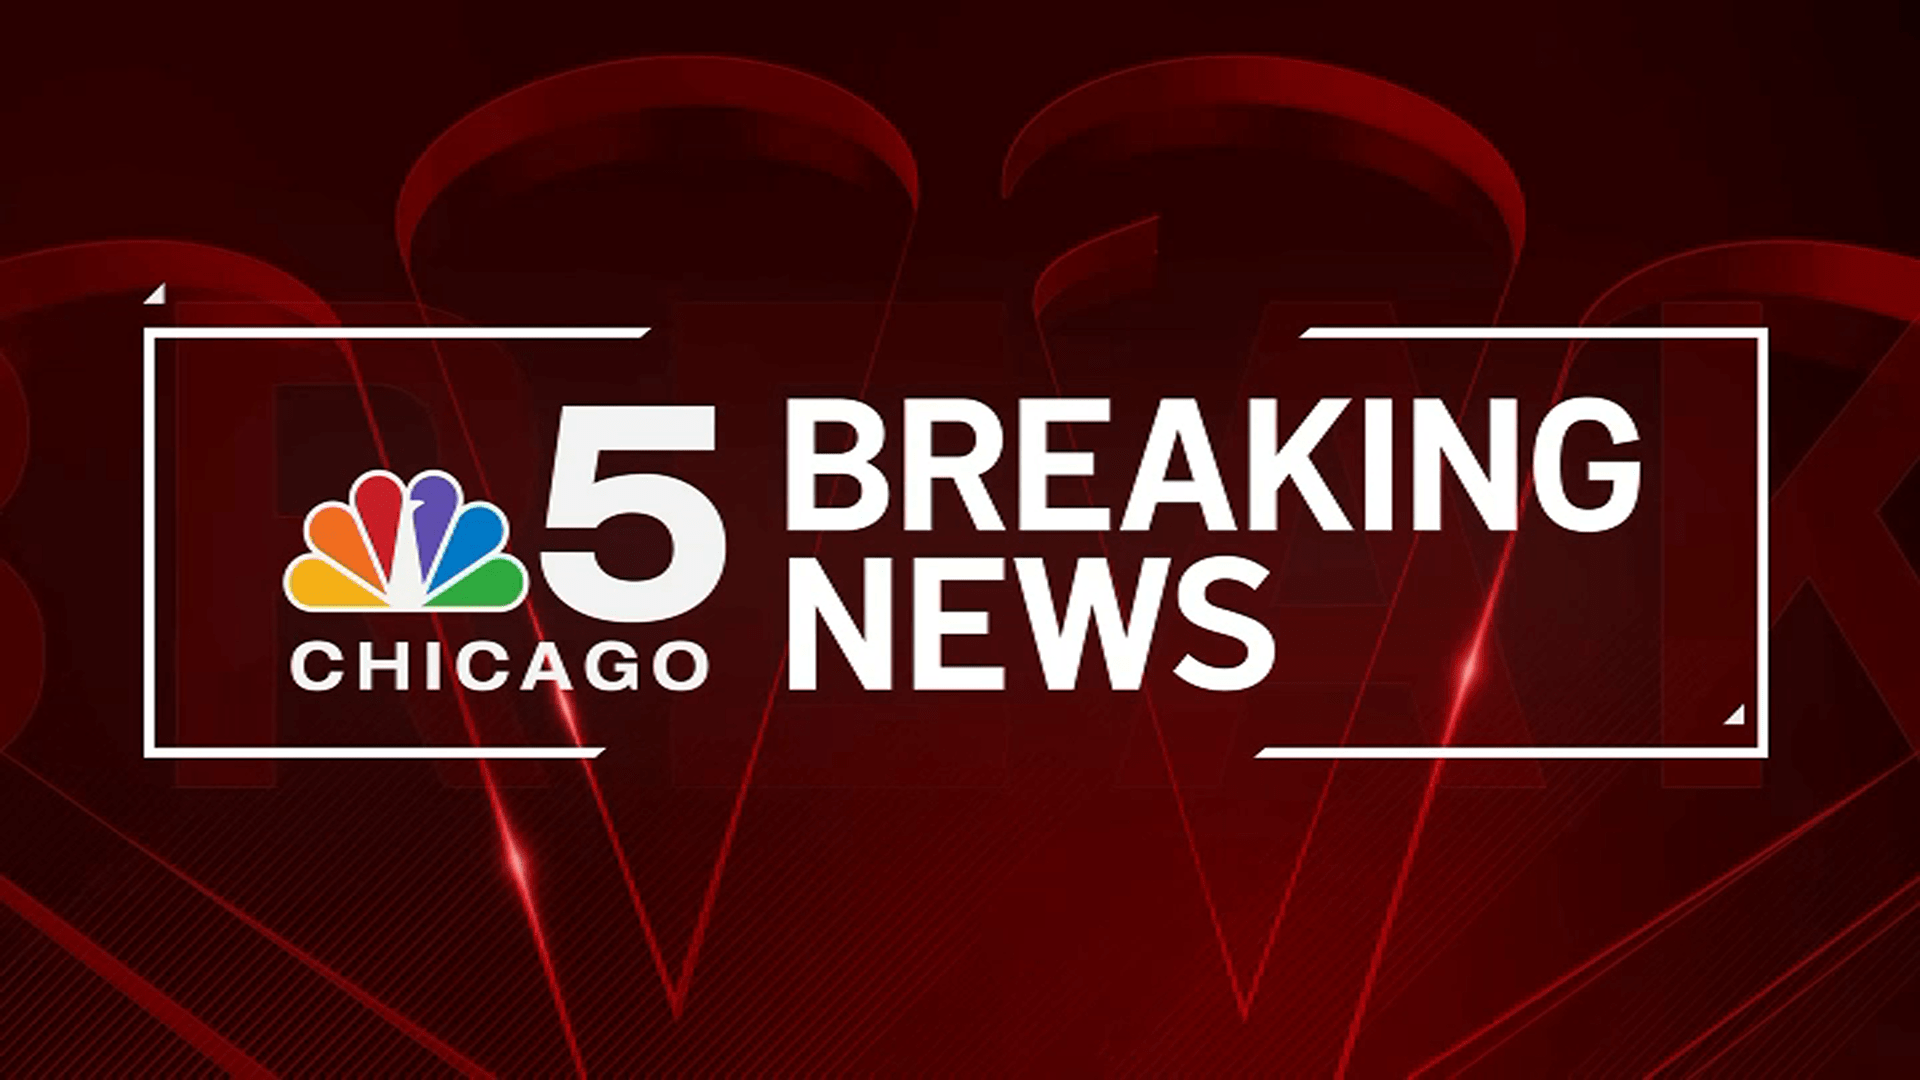 2 School Buses Involved in Accident on Stevenson Expressway; 4 Kids Hospitalized – NBC Chicago